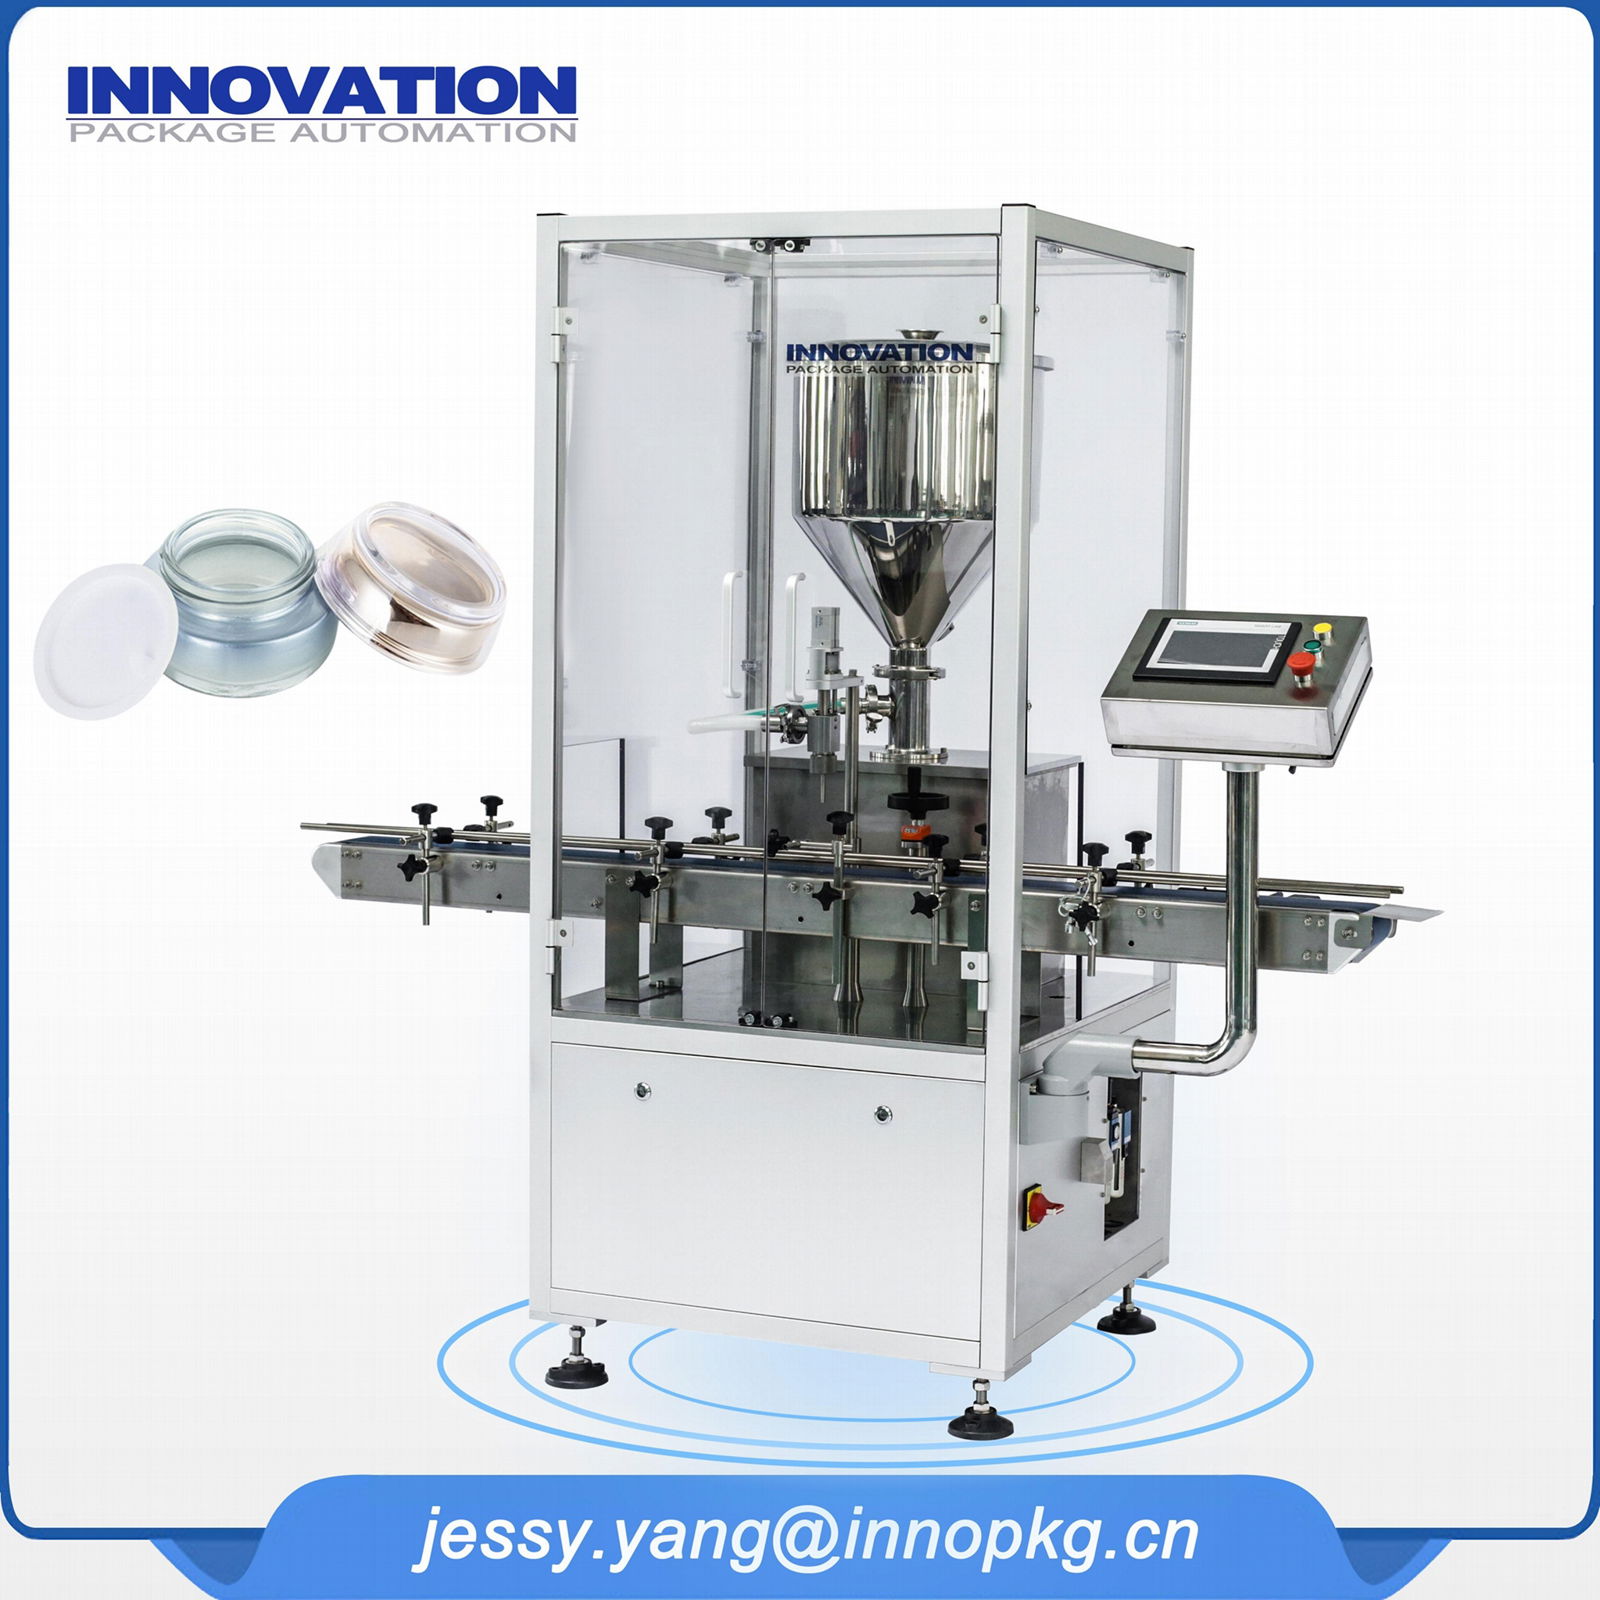 Automatic cosmetic cream and lotion liquid filling machine 